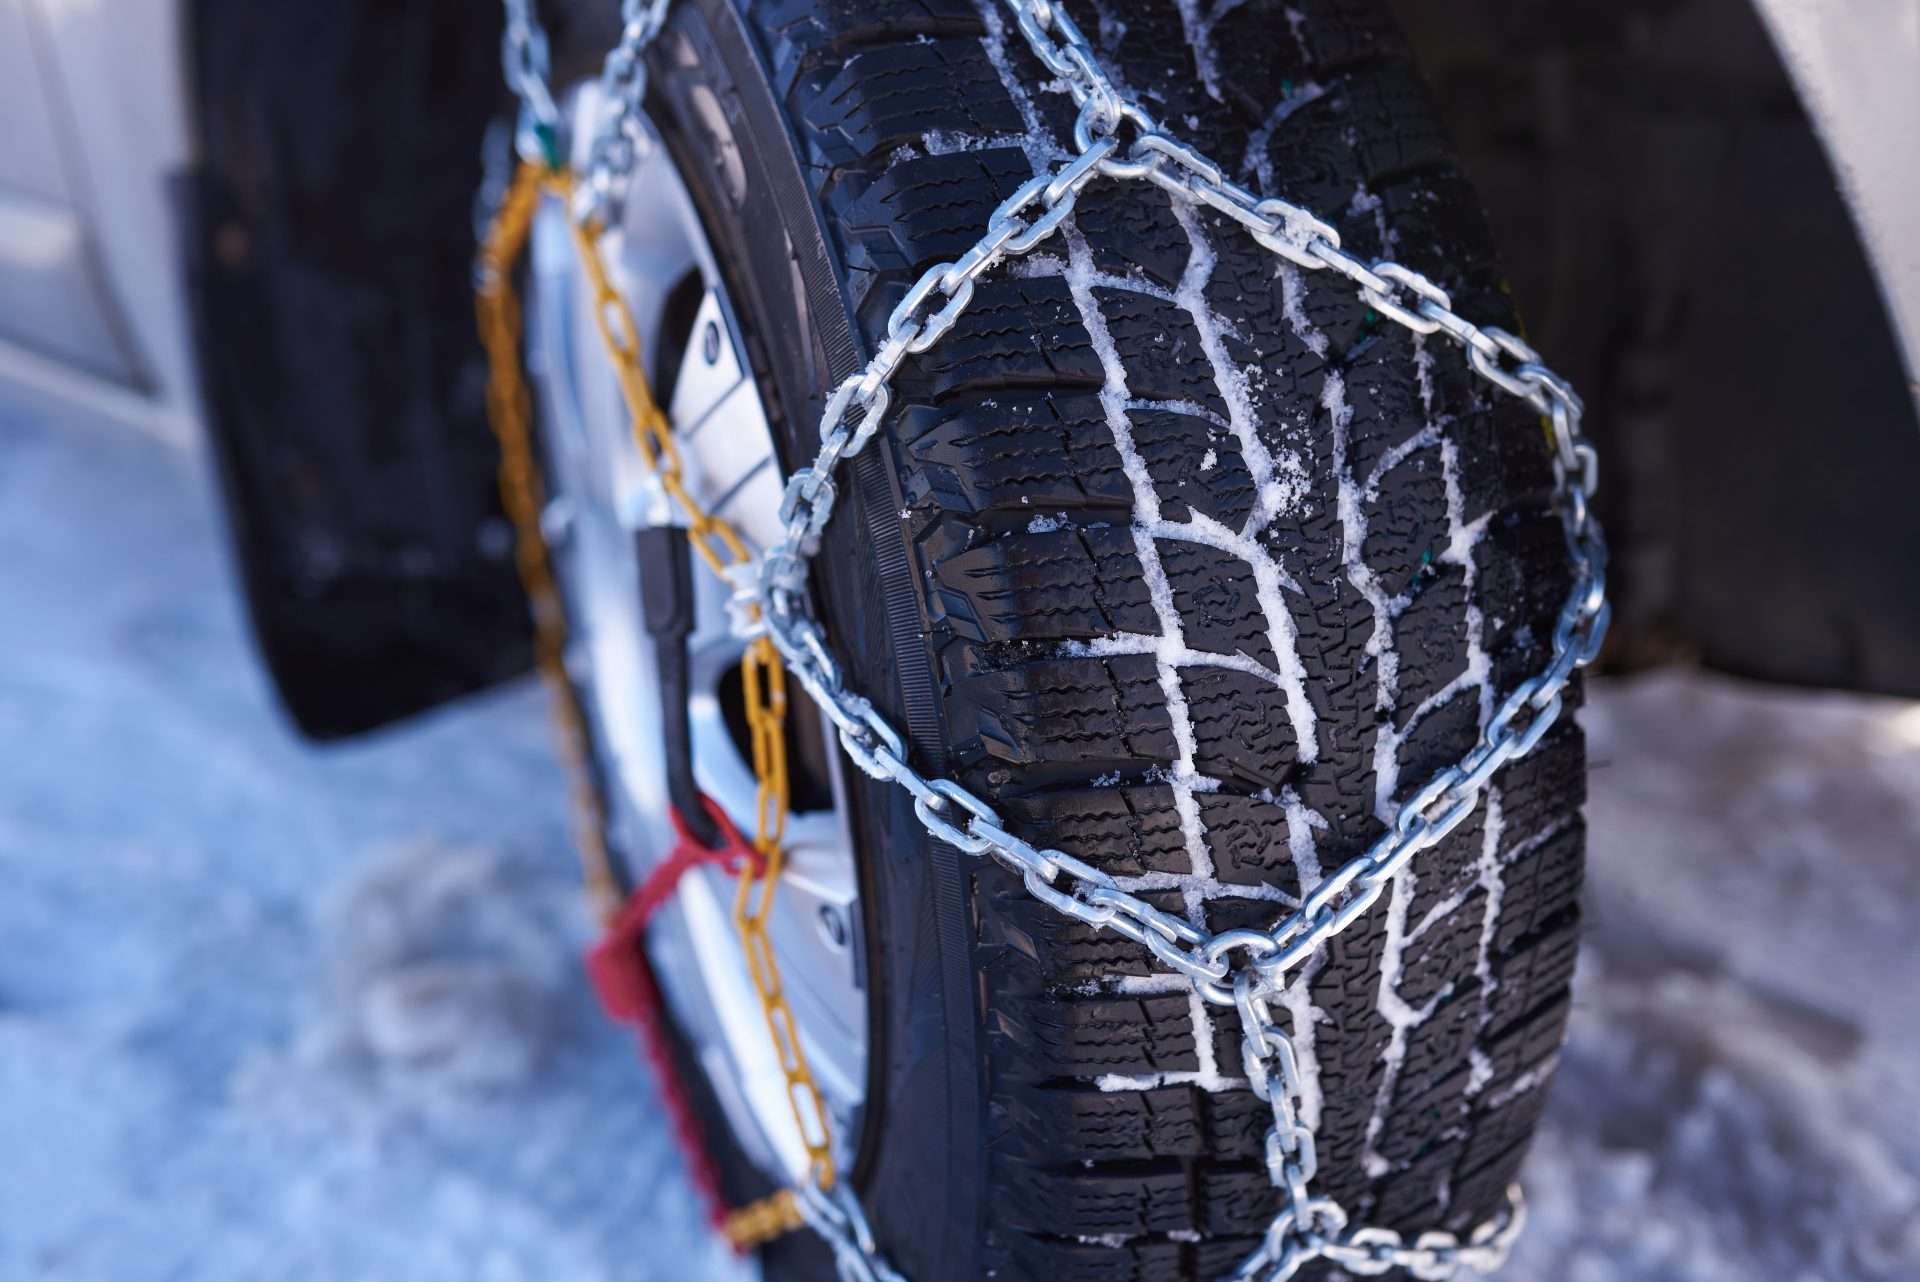 Close up of installed snow chains on tires